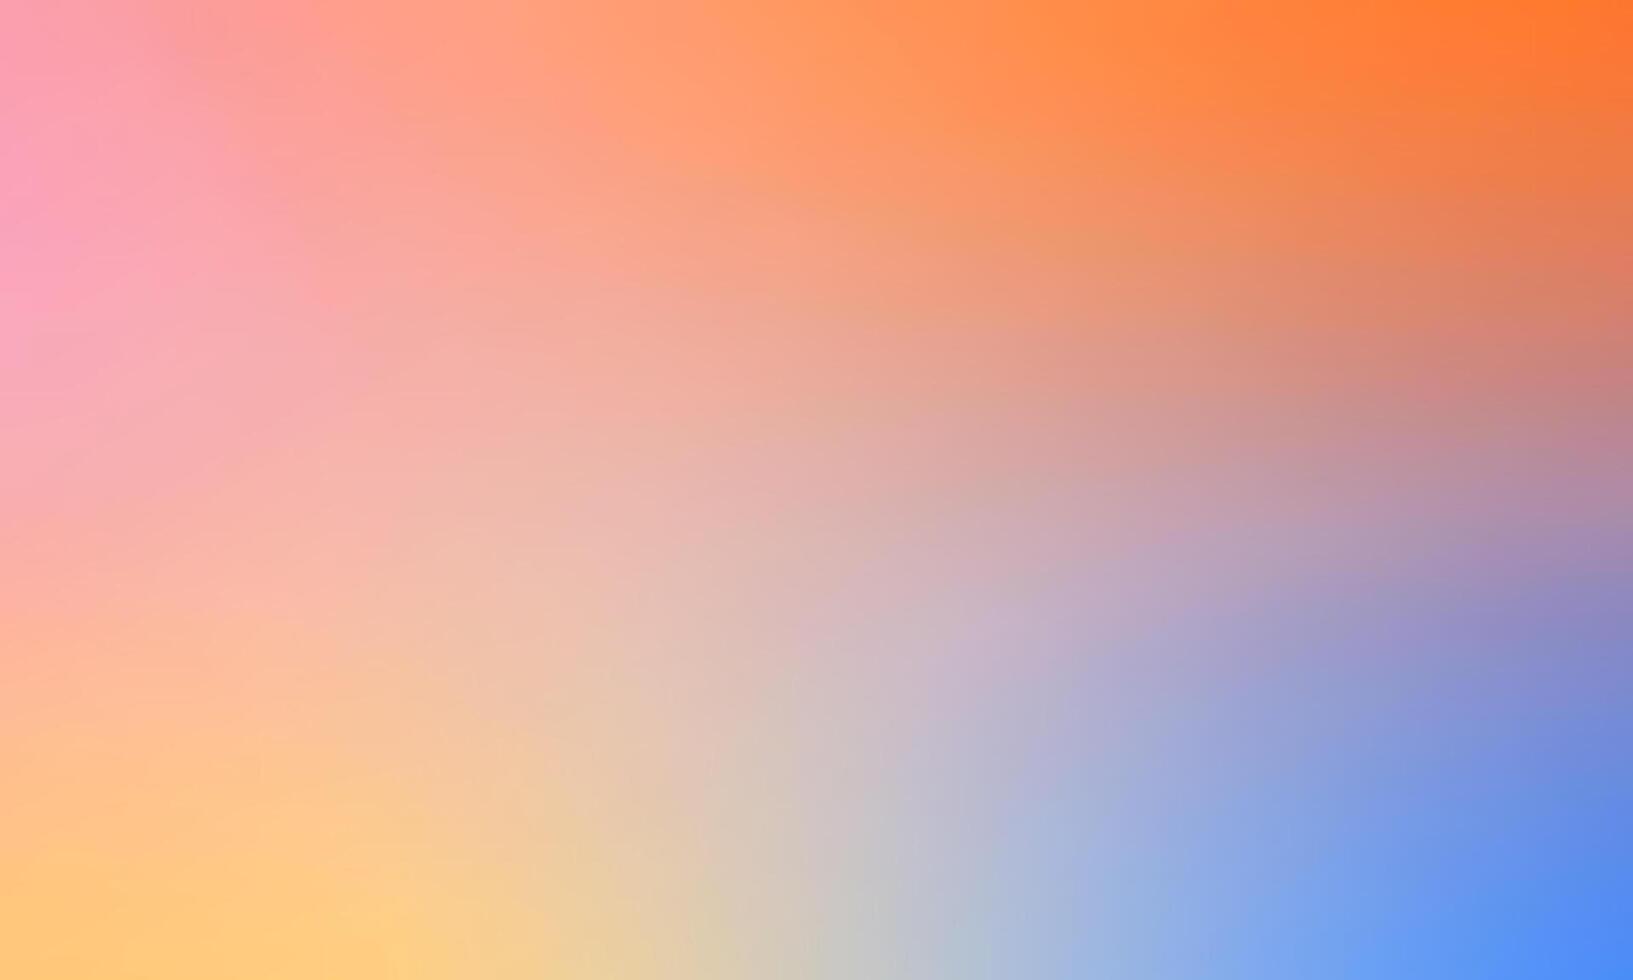 Soft Cloudy Gradient Pastel Abstract Sky Background with Sweet Colors vector